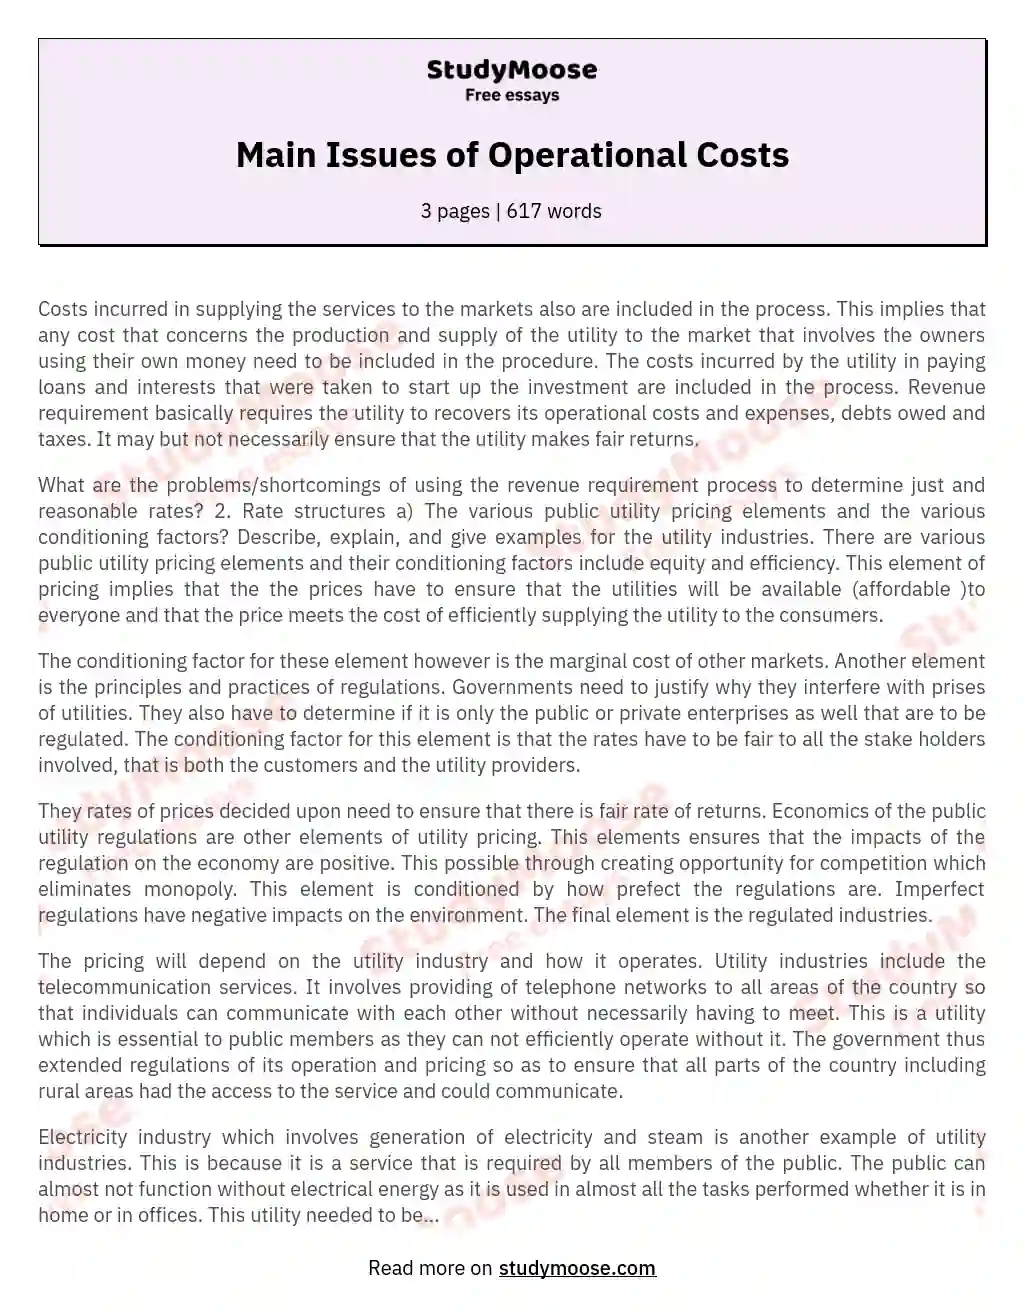 Main Issues of Operational Costs essay